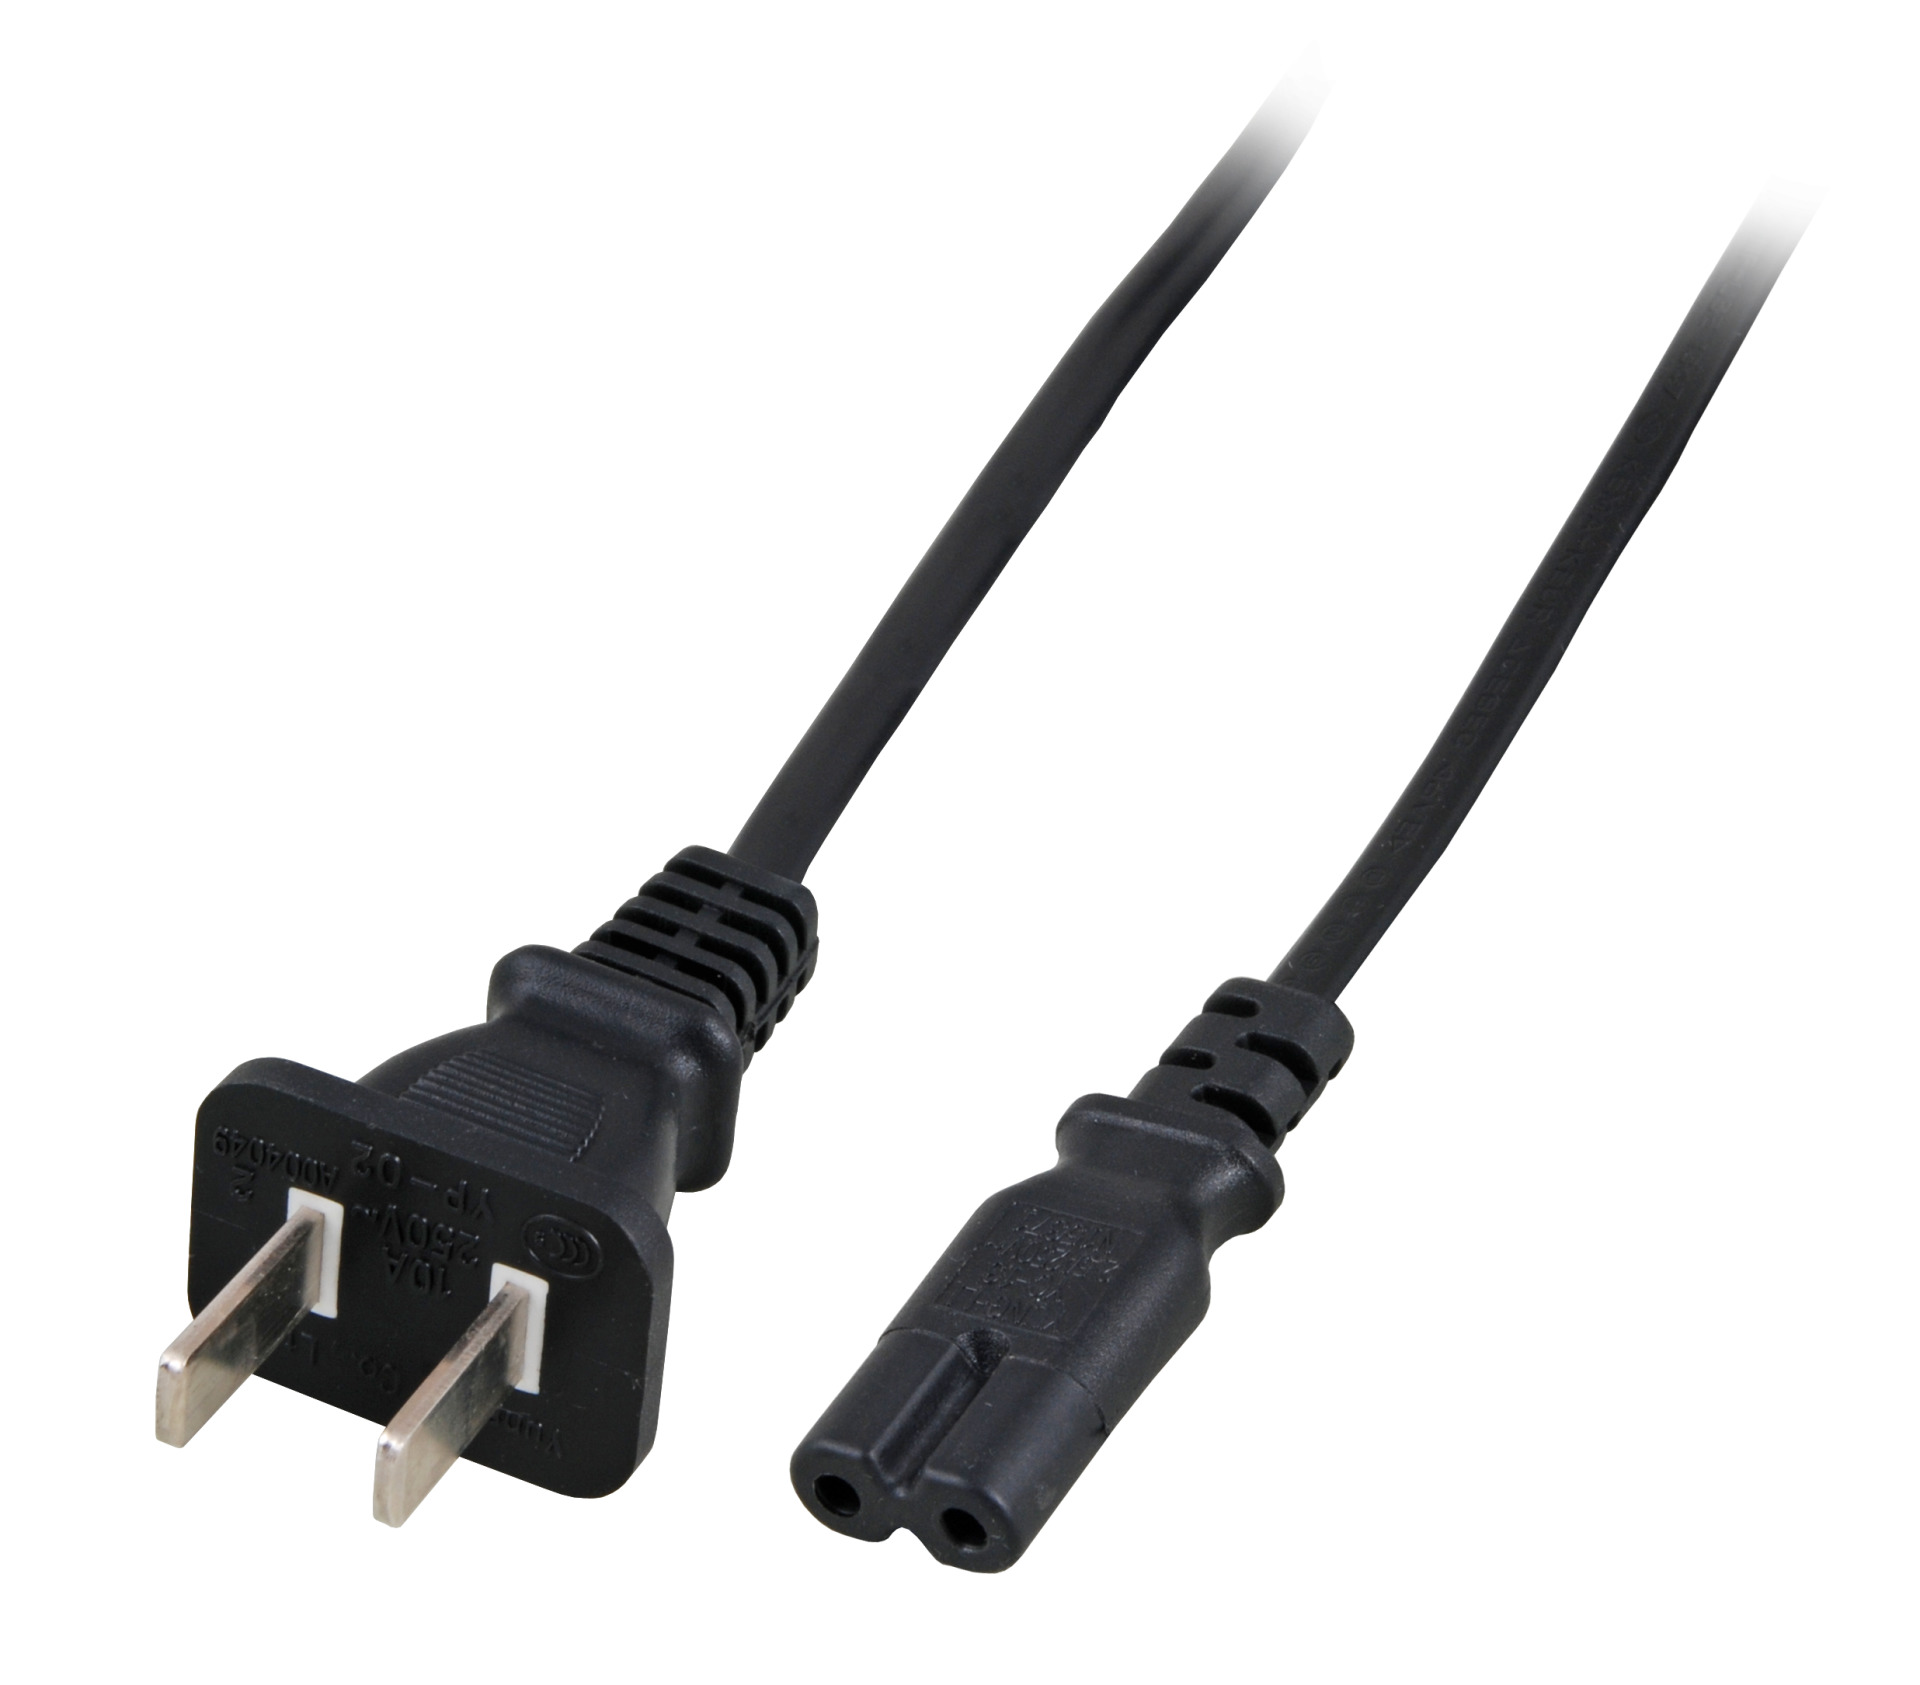 Power Cable China Type A - C7 180°, Black, 1.8 m, 2 x 0.75 mm²